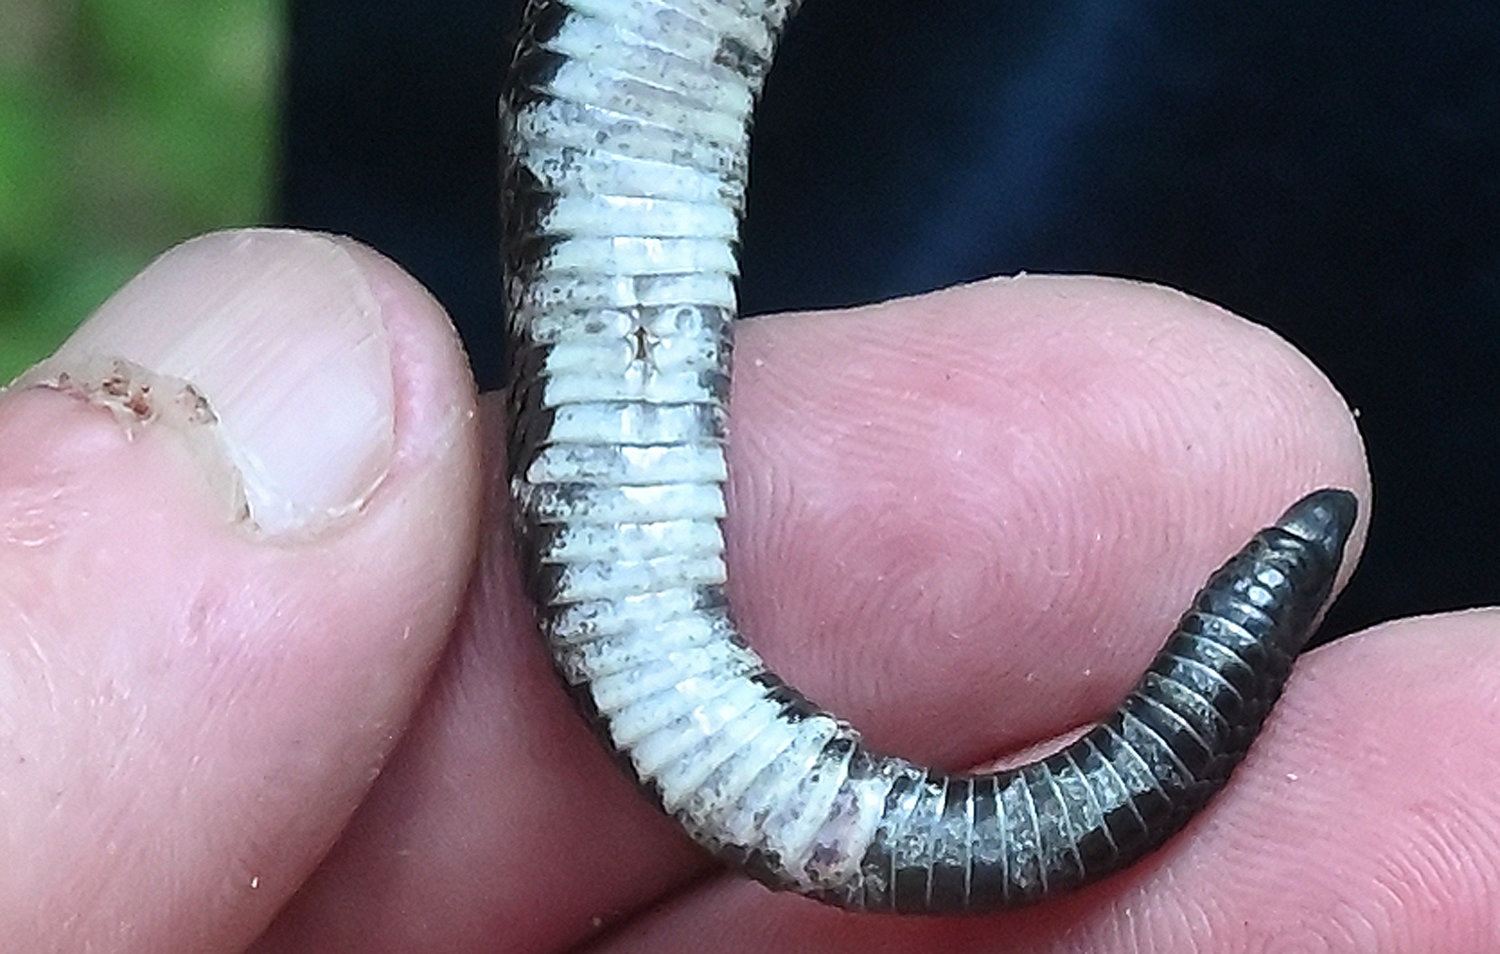 This is the tail of the same animal, showing the subcaudal scales and the single rattle segment. Counting subcaudal scales on a timber rattlesnake is used to determine sex; 21 or more subcaudals indicates a male. This young has 21. Also note that to the right of the thumb is what looks like a slit bisecting a couple of caudal scales; that is where the umbilical cord was attached before this snake was born. The single rattle segment, or button, means it only shed once since birth. Later on in the summer, it will shed again and obtain another rattle segment; then it will actually be able to make an audible rattle.